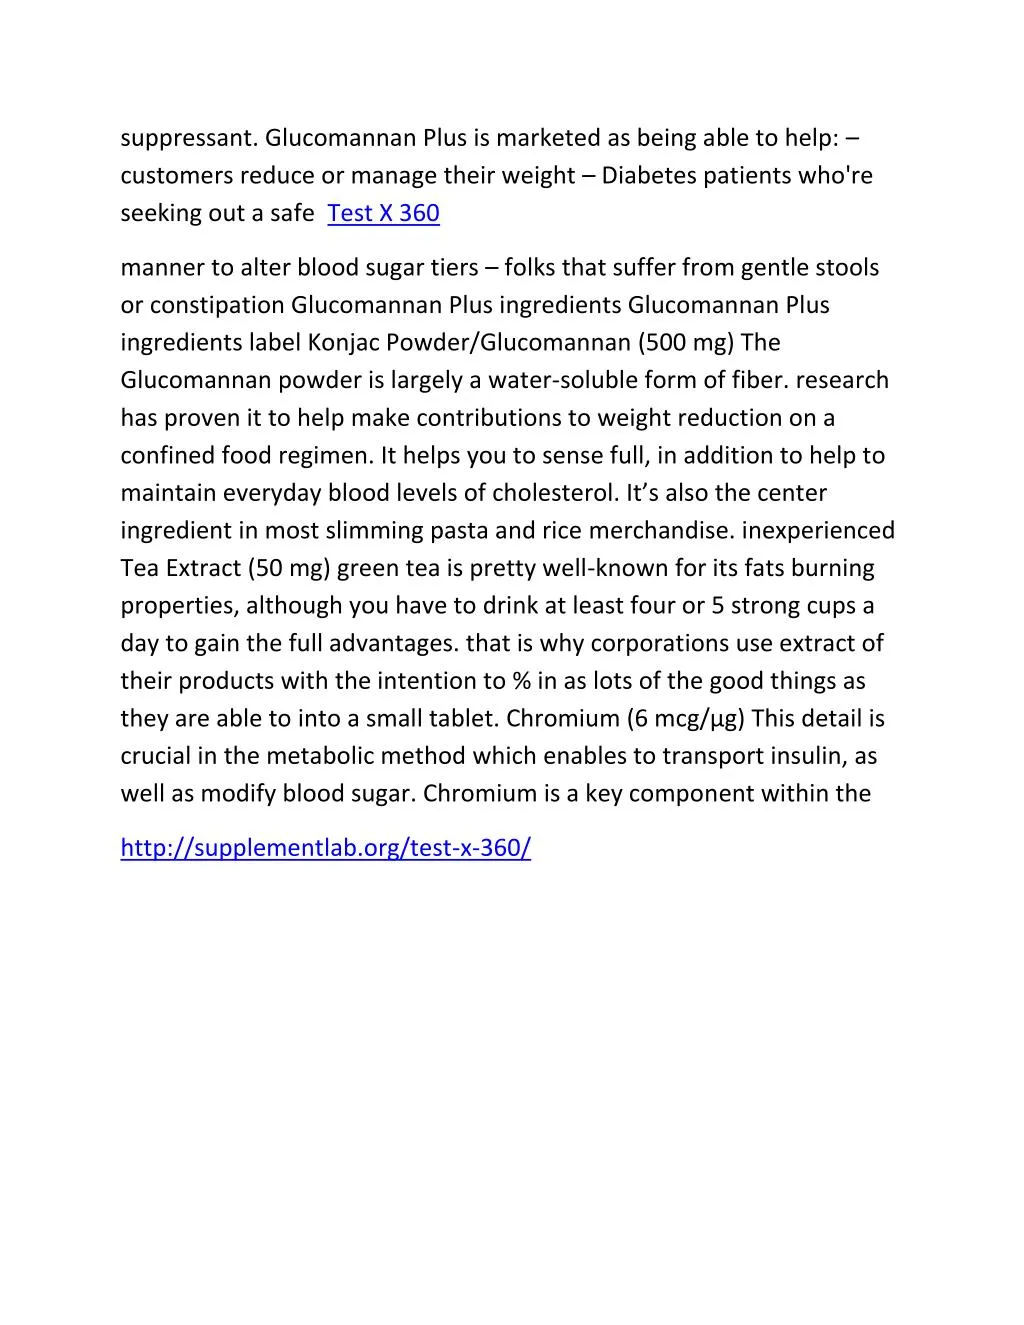 suppressant glucomannan plus is marketed as being